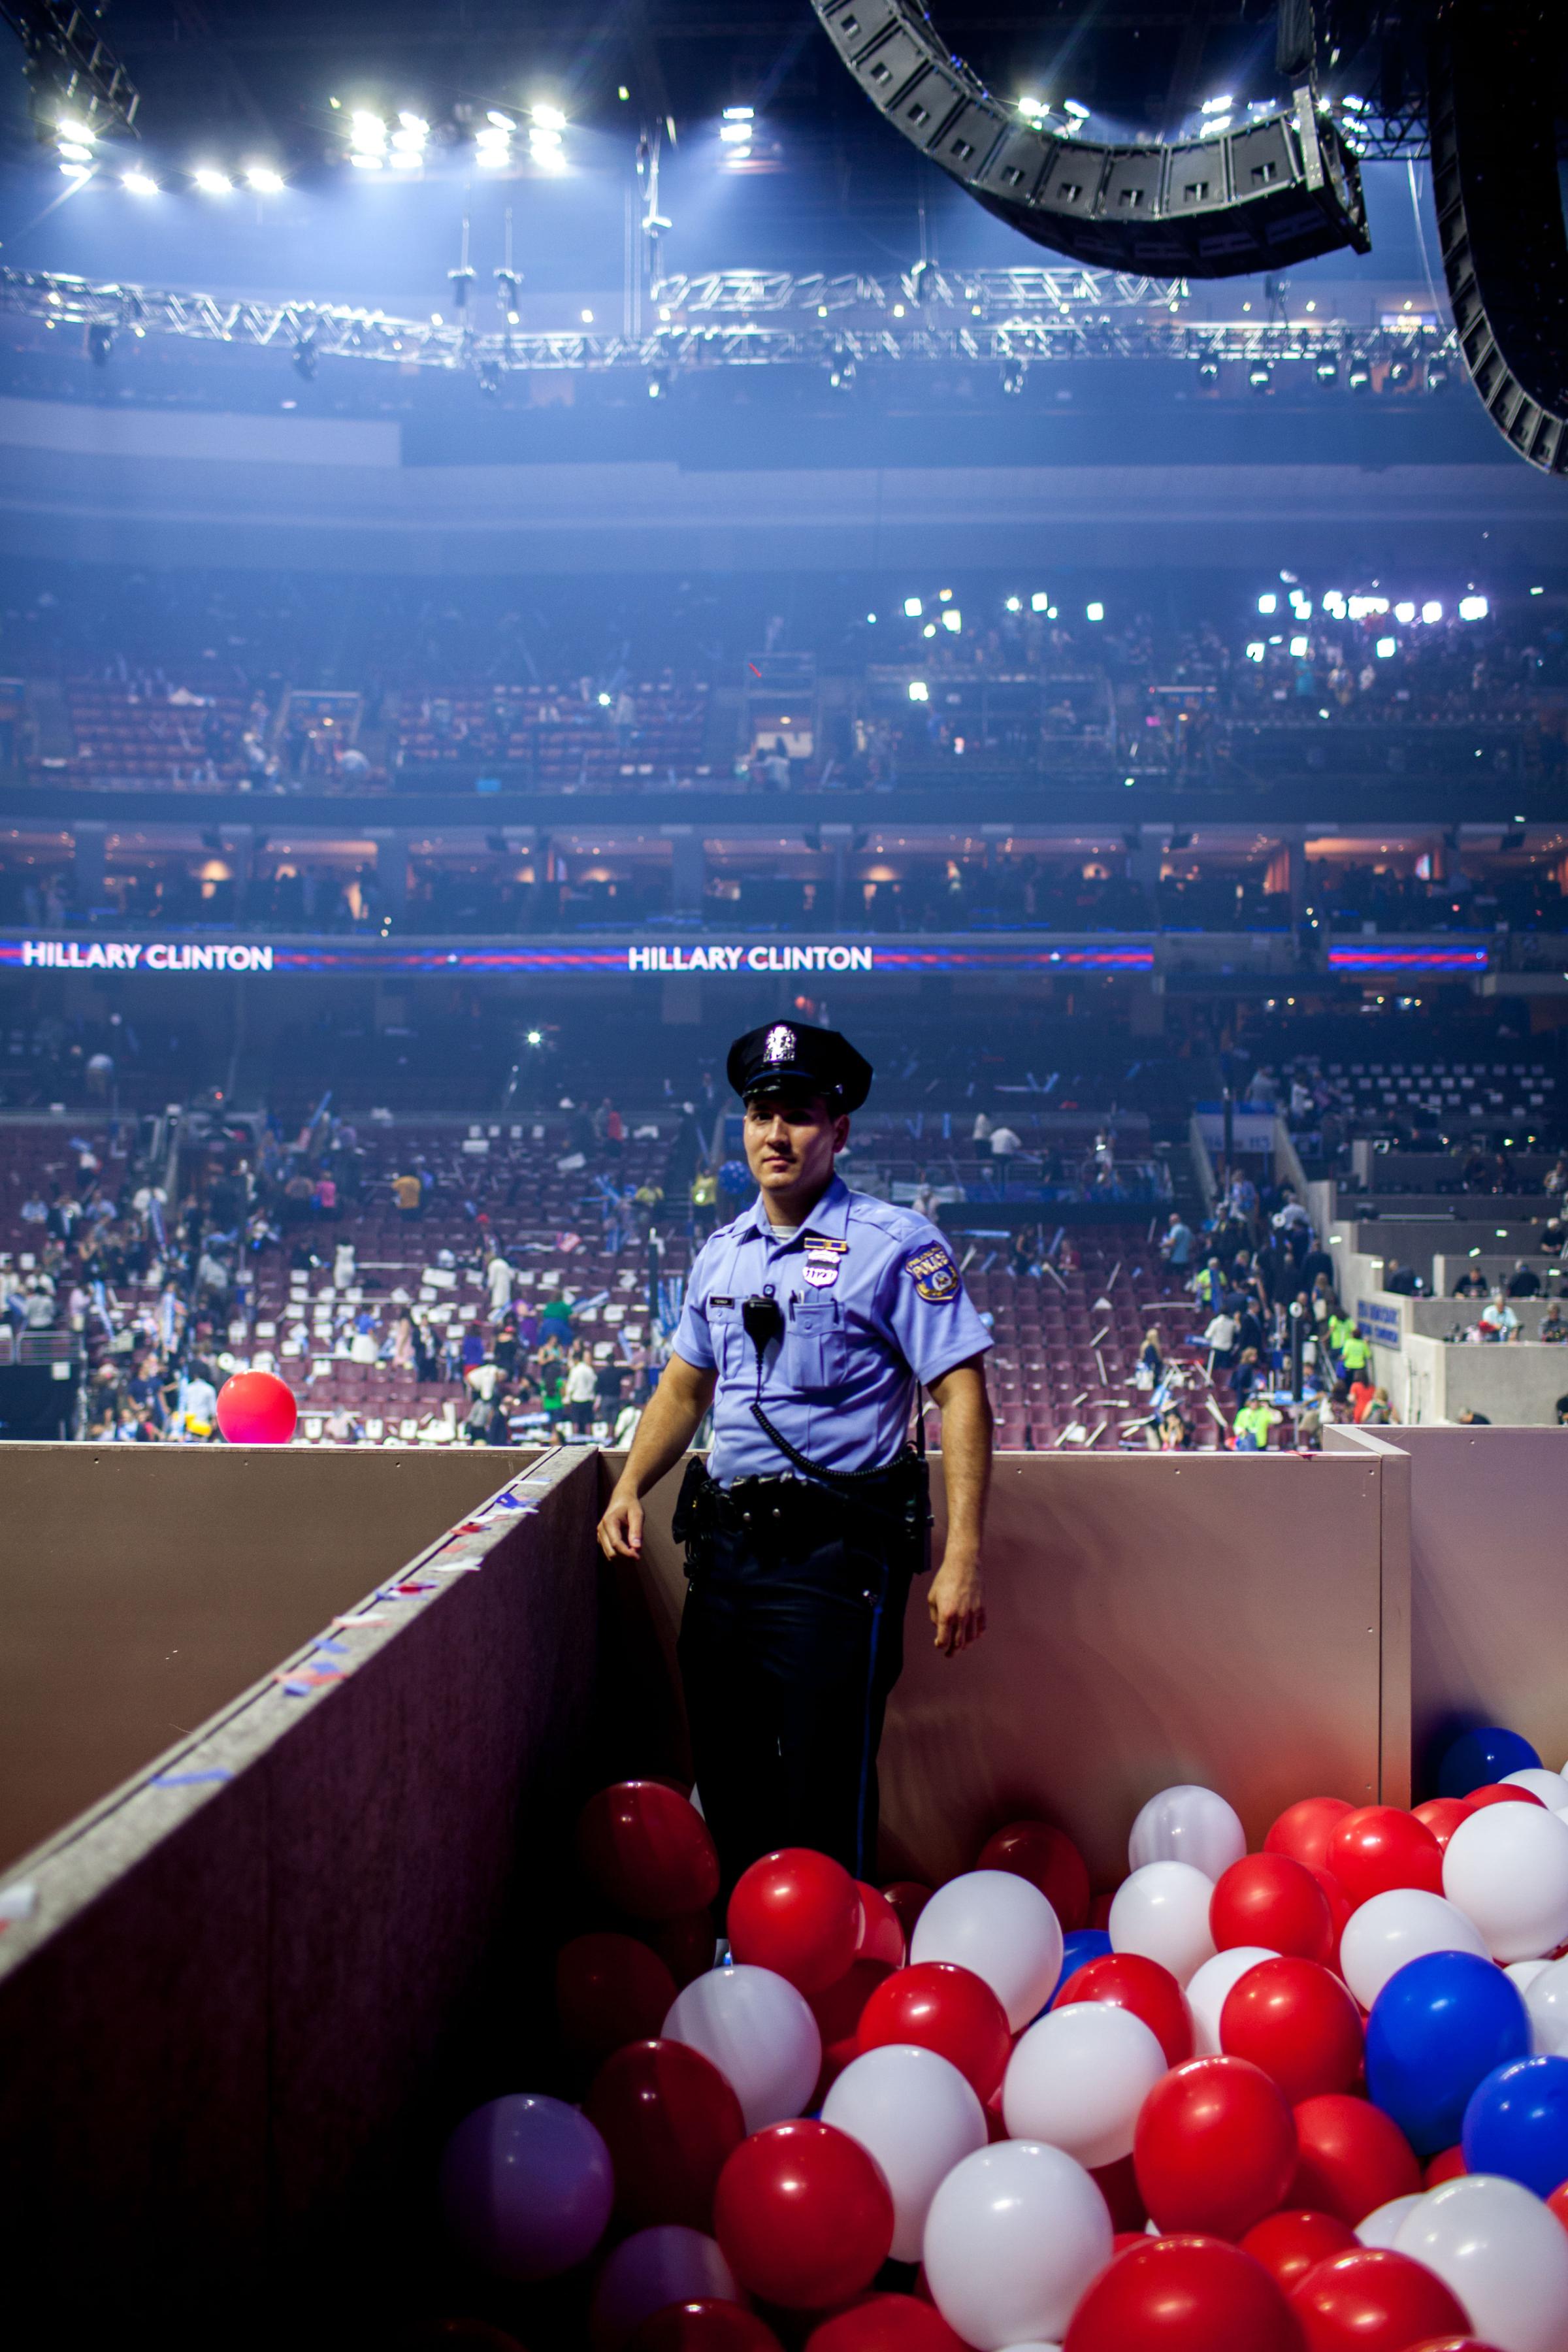 Security backstage on the fourth day of the Democratic National Convention at the Wells Fargo Center in Philadelphia, Pennsylvania, on July 28, 2016.